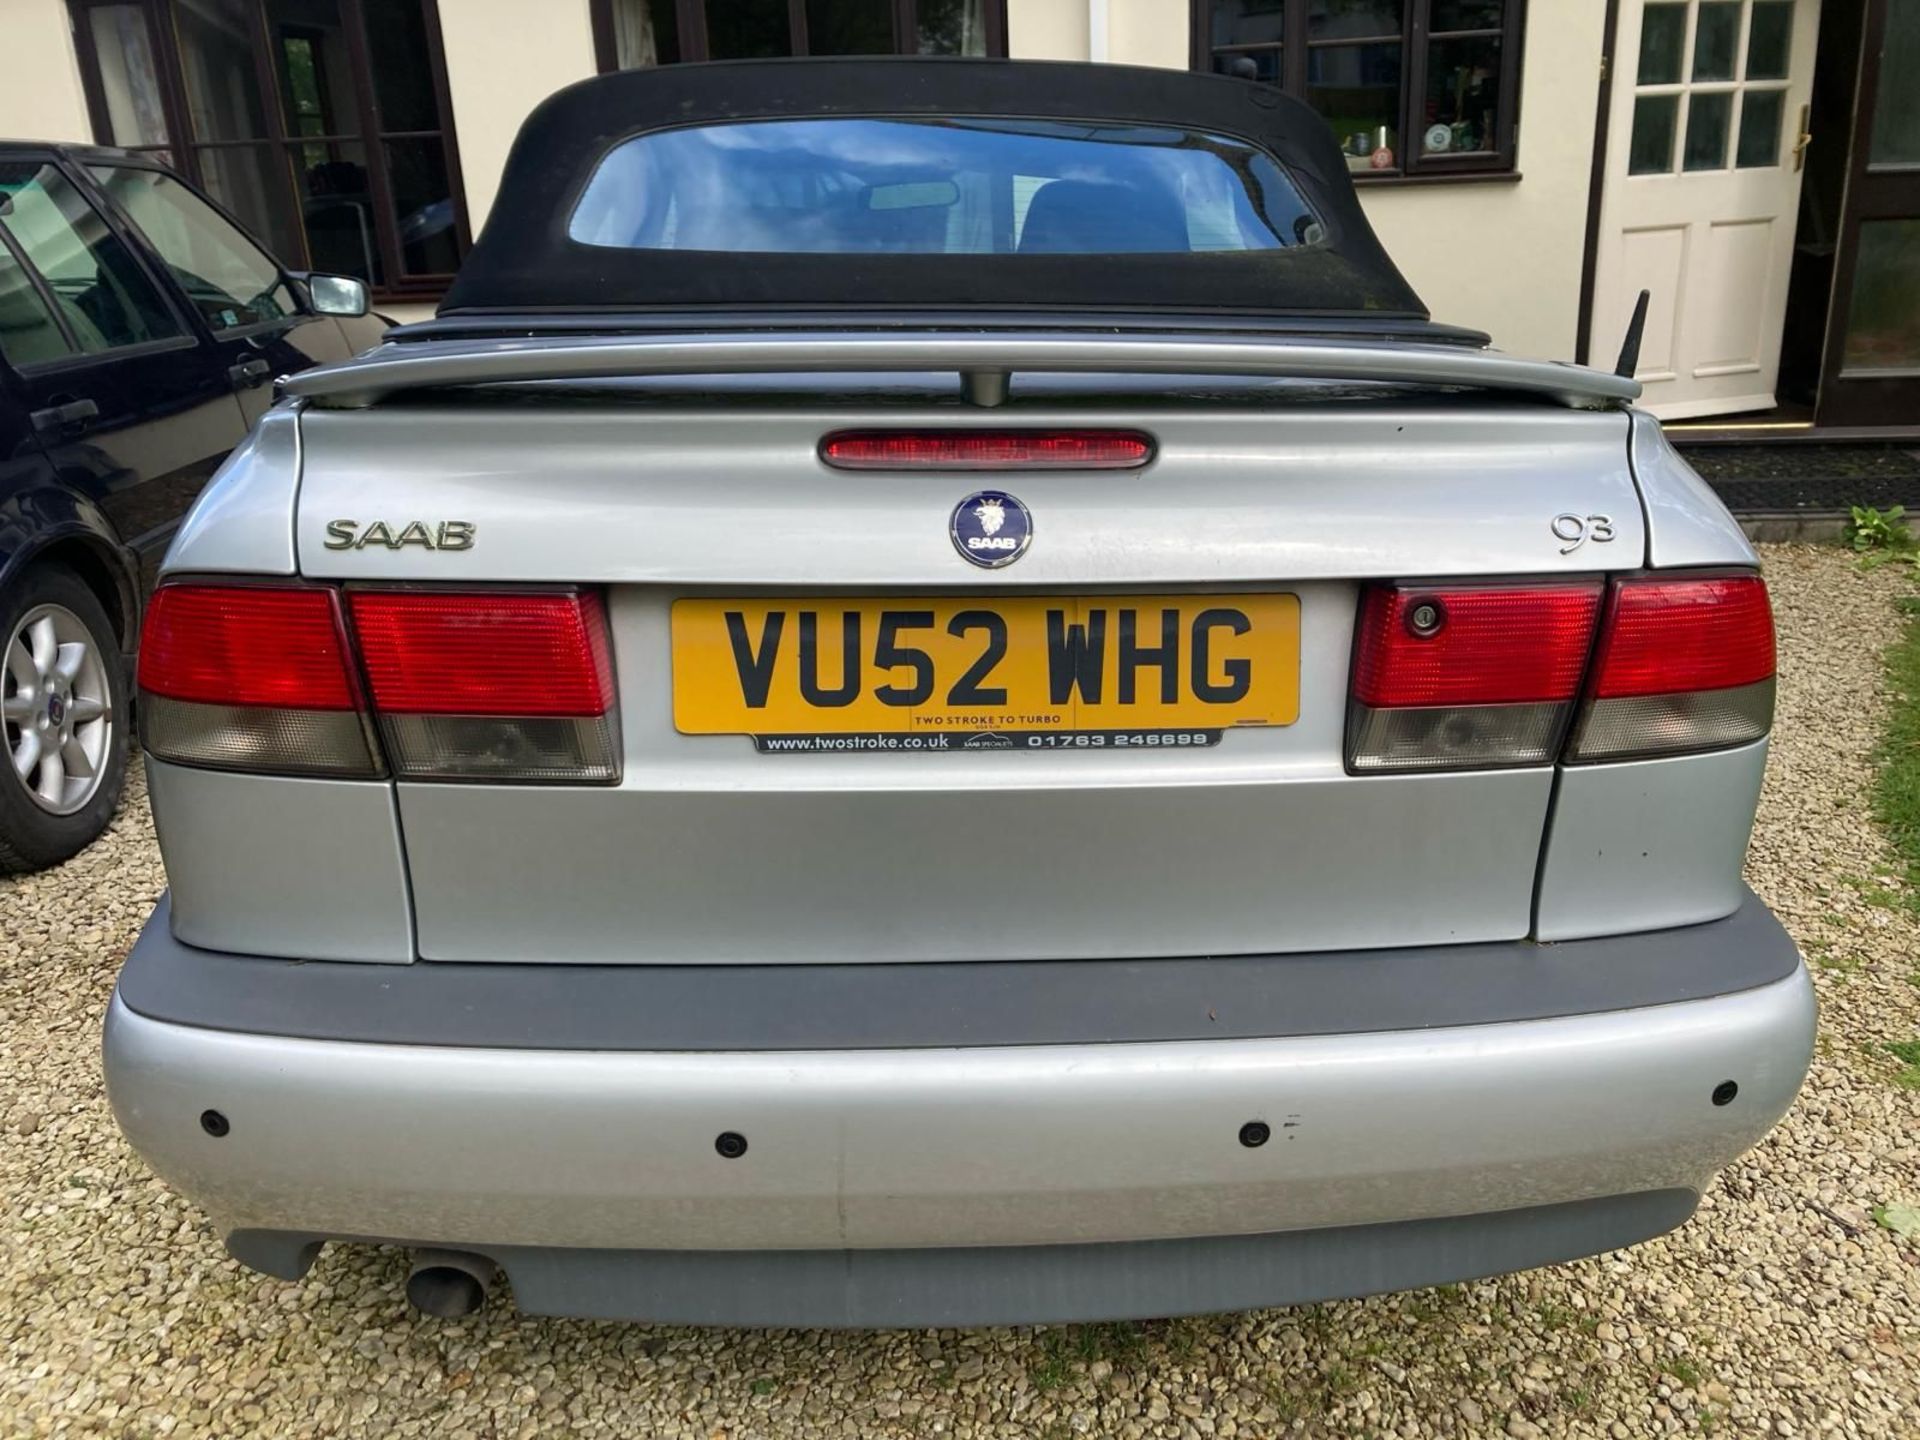 2002 Saab 9-3 Aero Convertible with 11 months MOT - Offered at No Reserve - Image 8 of 24